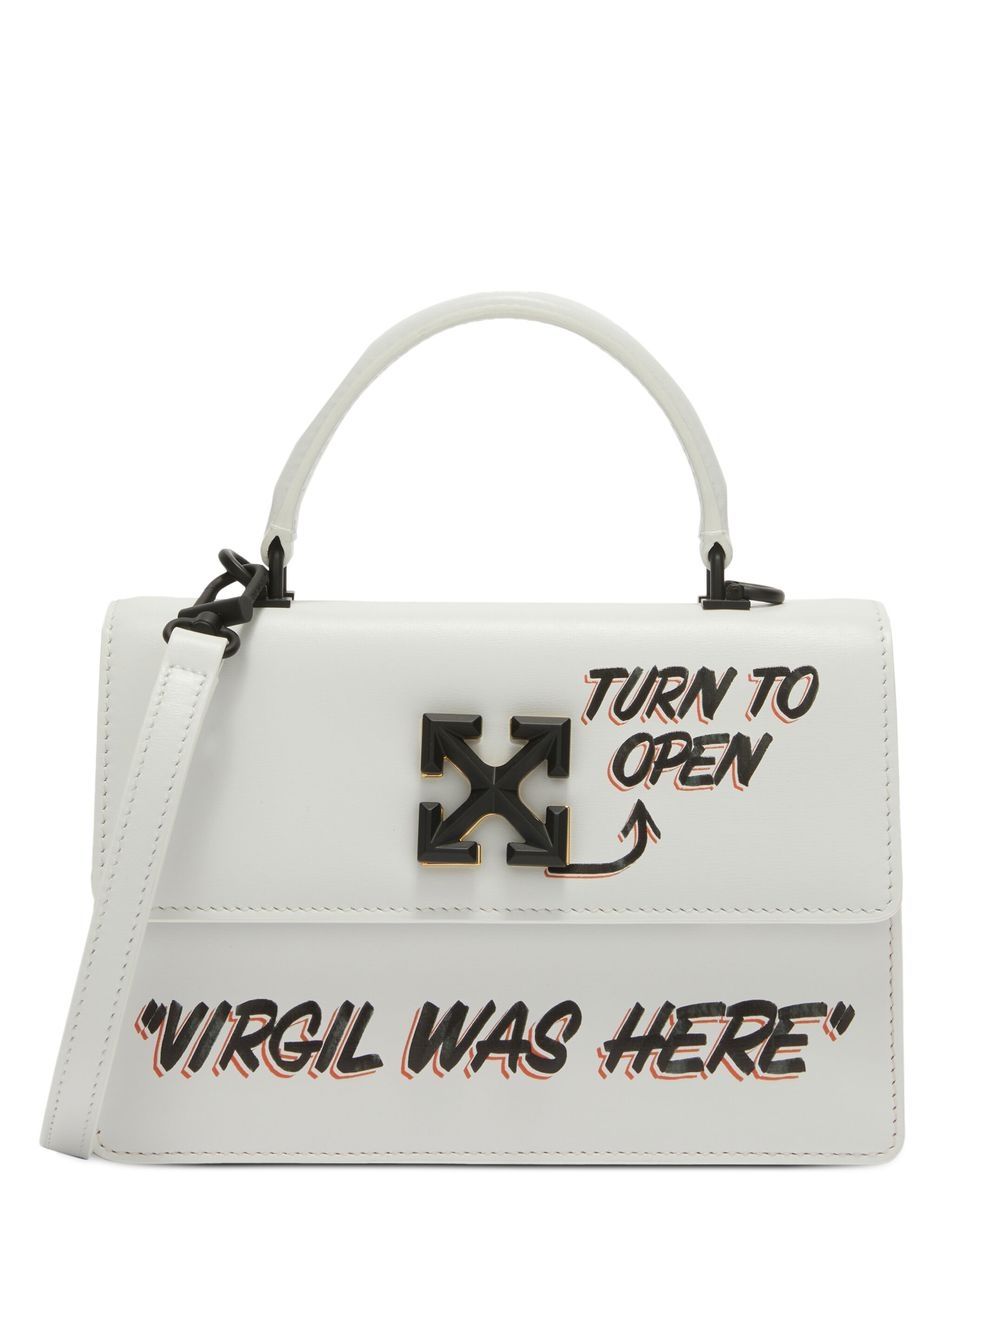 Off-White Jitney Tote Bag in Straw and Leather – AUMI 4